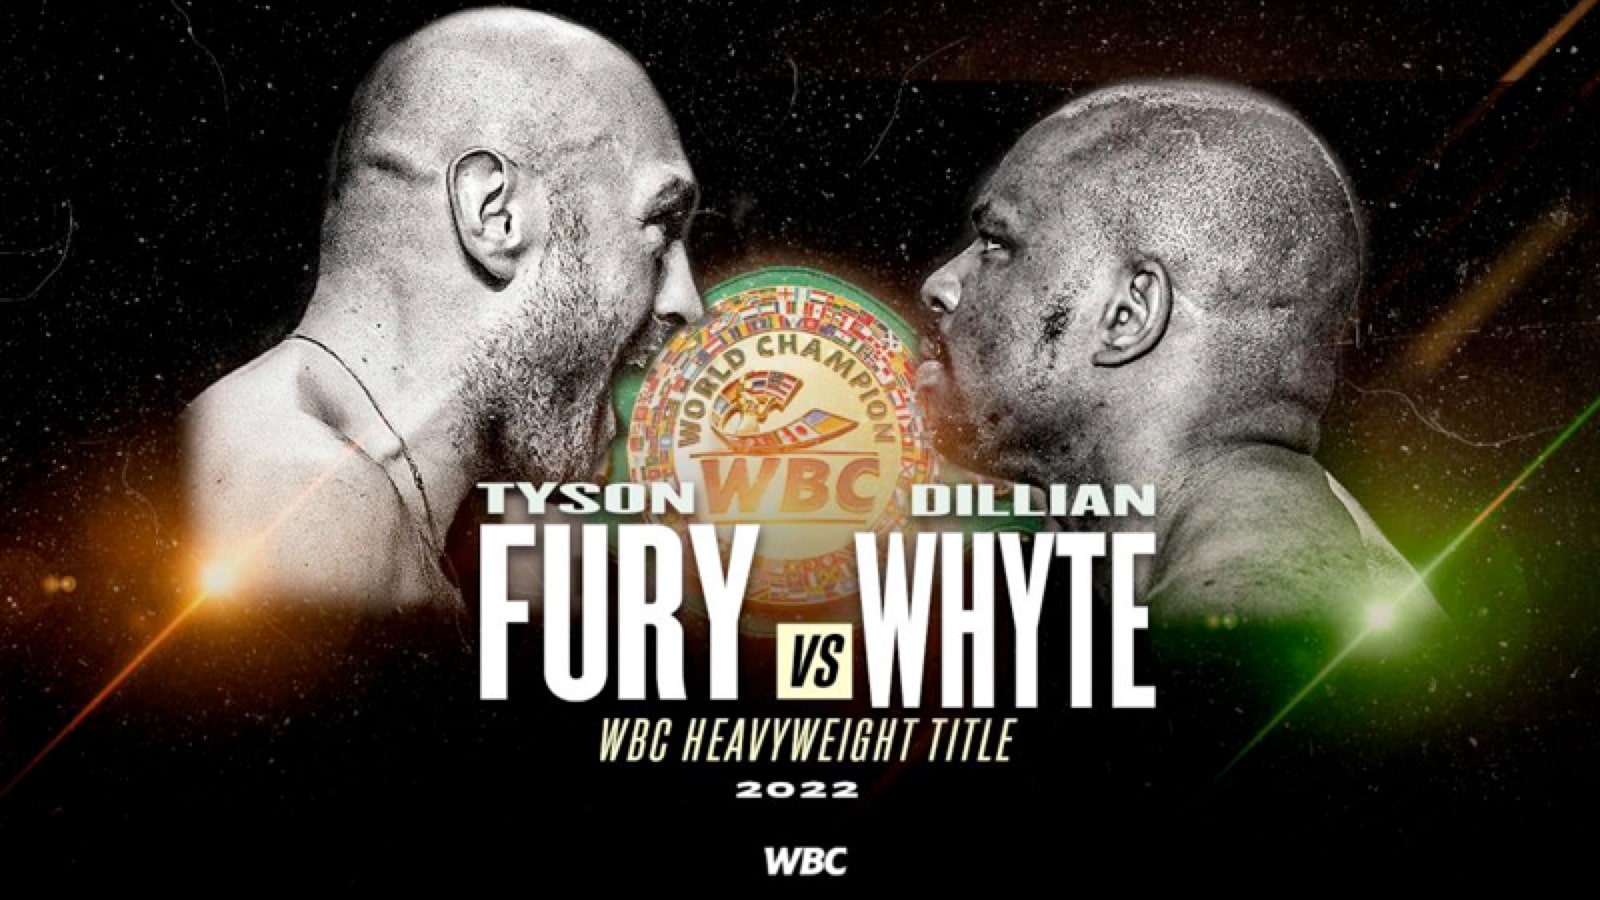 Tyson Fury: “I Will Detonate A Big Right Hand And Knock Dillian Whyte Out Cold”